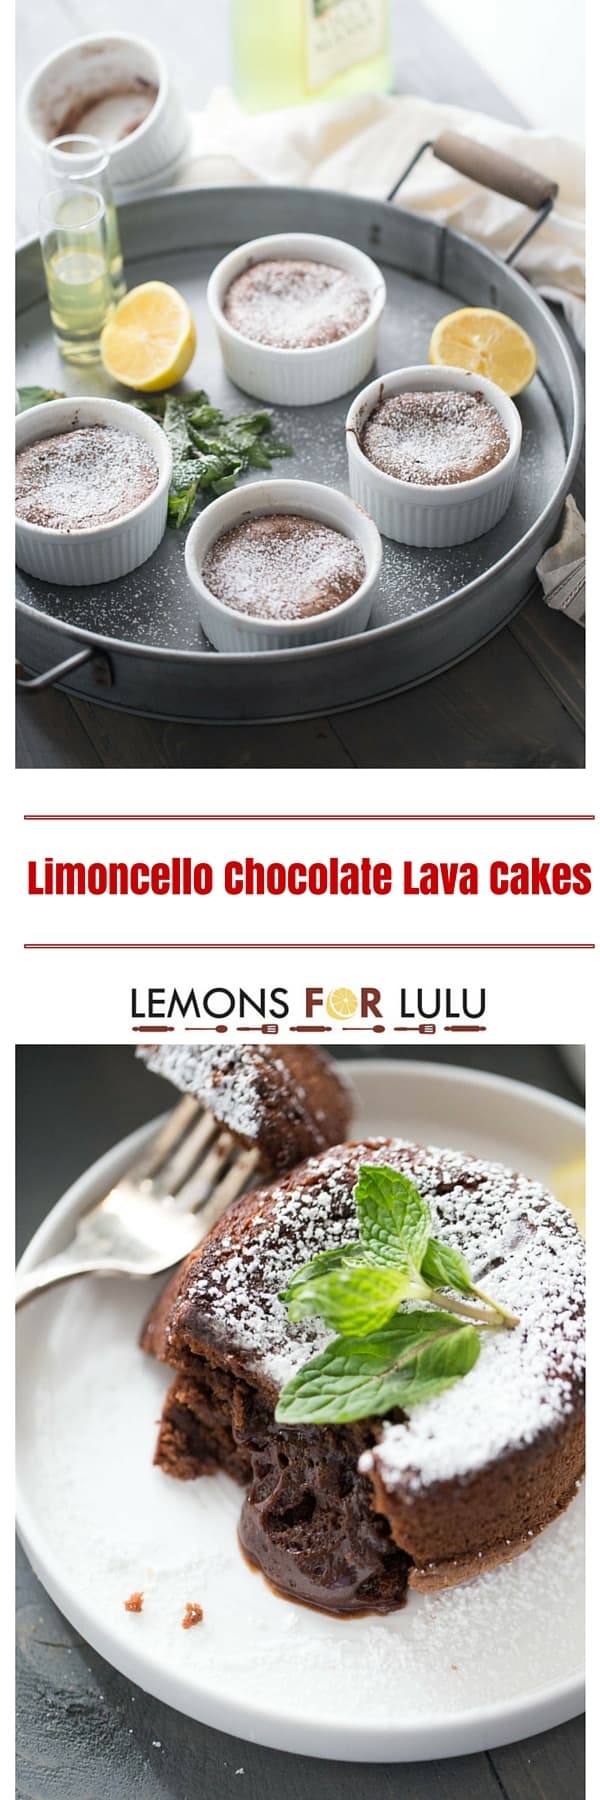 Limoncello Chocolate Lava Cake - This chocolate dessert is outrageous! It has a tender cake and gooey fudy center that has the subtelest taste of lemon! This easy molten lava cake recipe is elegant, impressive, but so simple